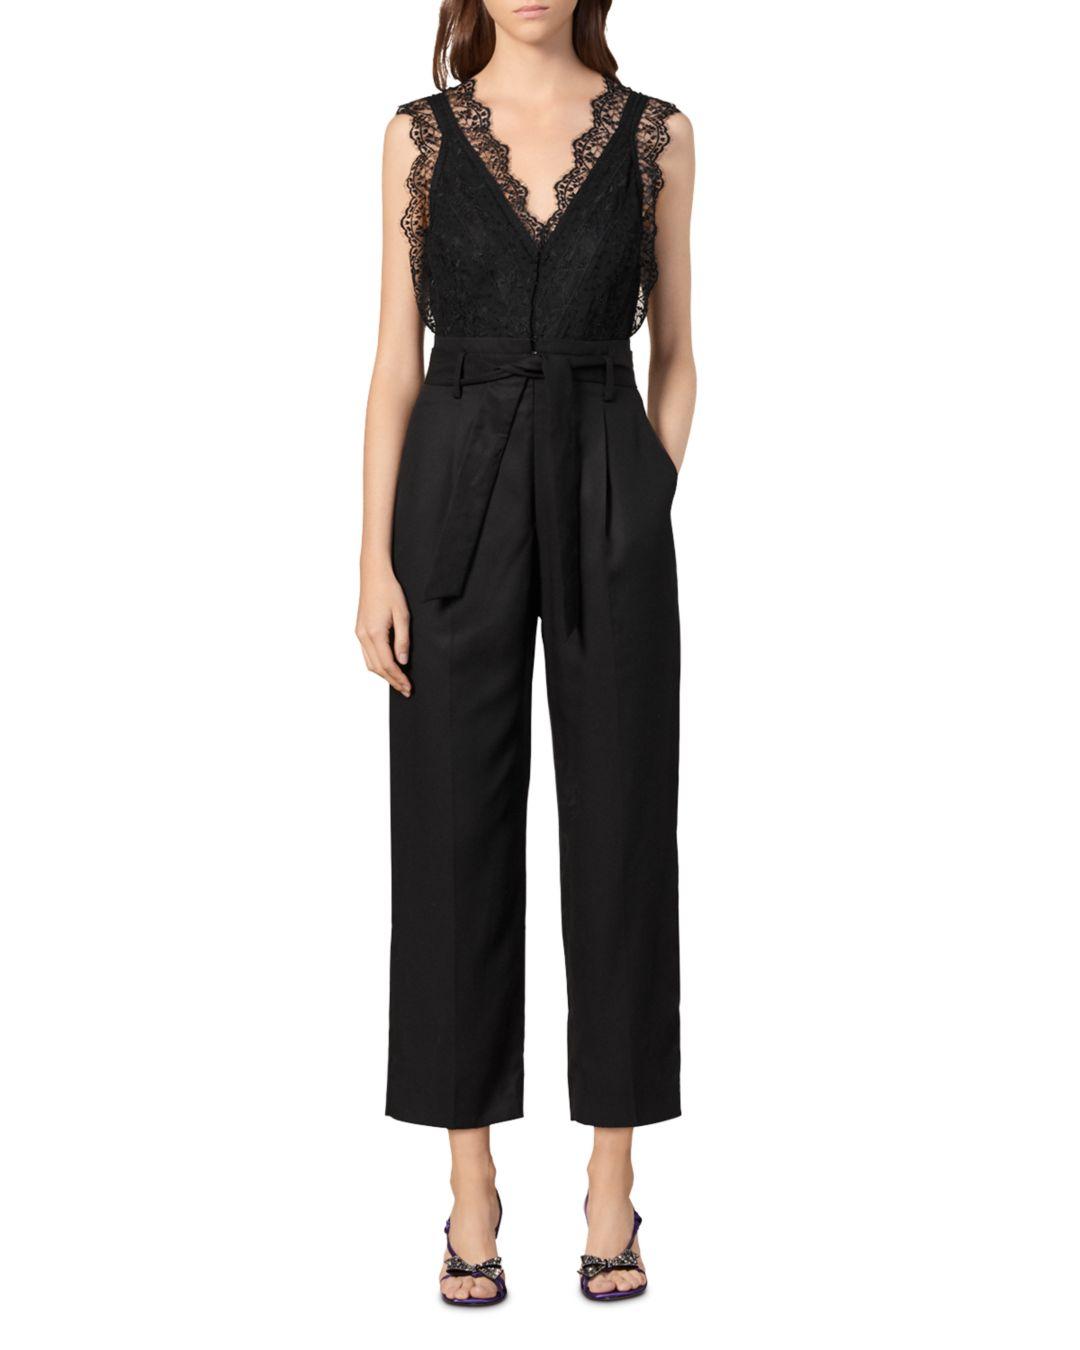 Sandro Alexis Belted Lace - Detail Jumpsuit in Black - Lyst